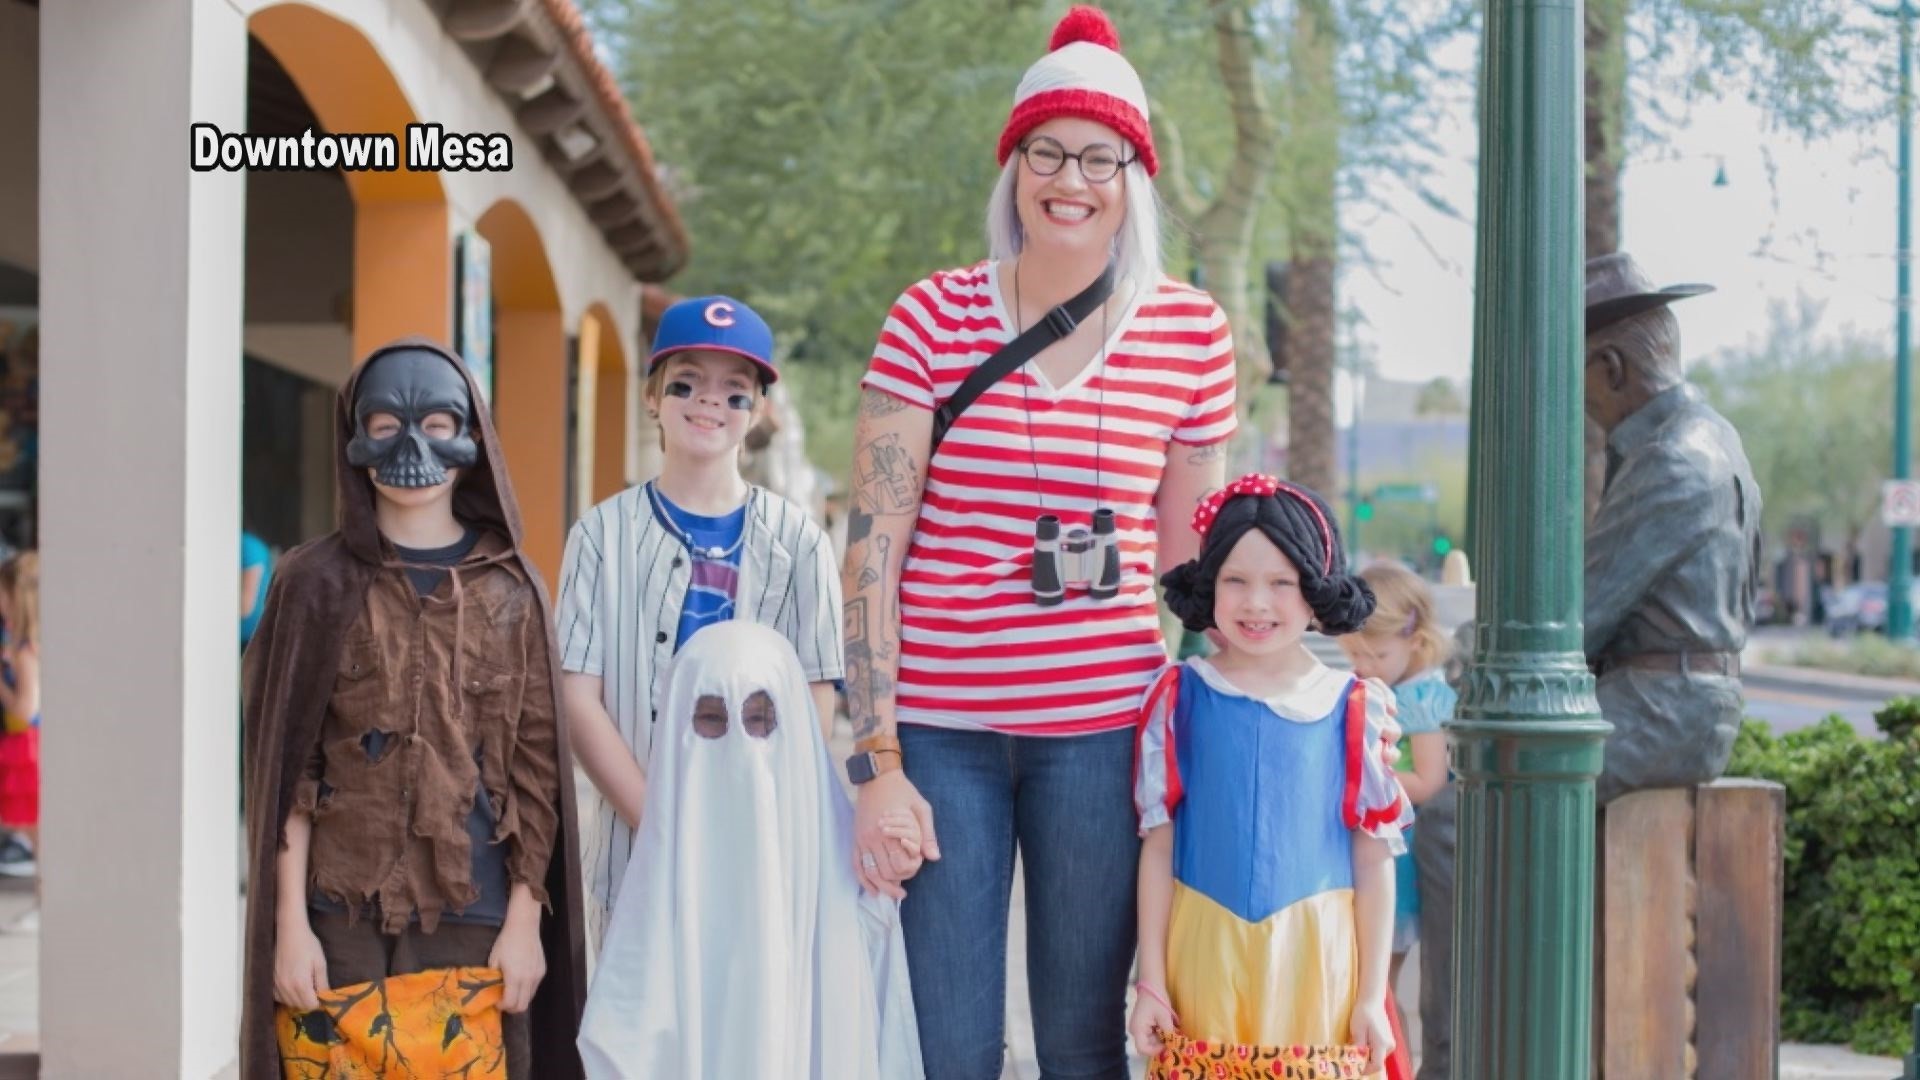 If you don't want your kids roaming free on Halloween then take the fear out of trick-or-treating with a safe, fun way to gather candy in Mesa.